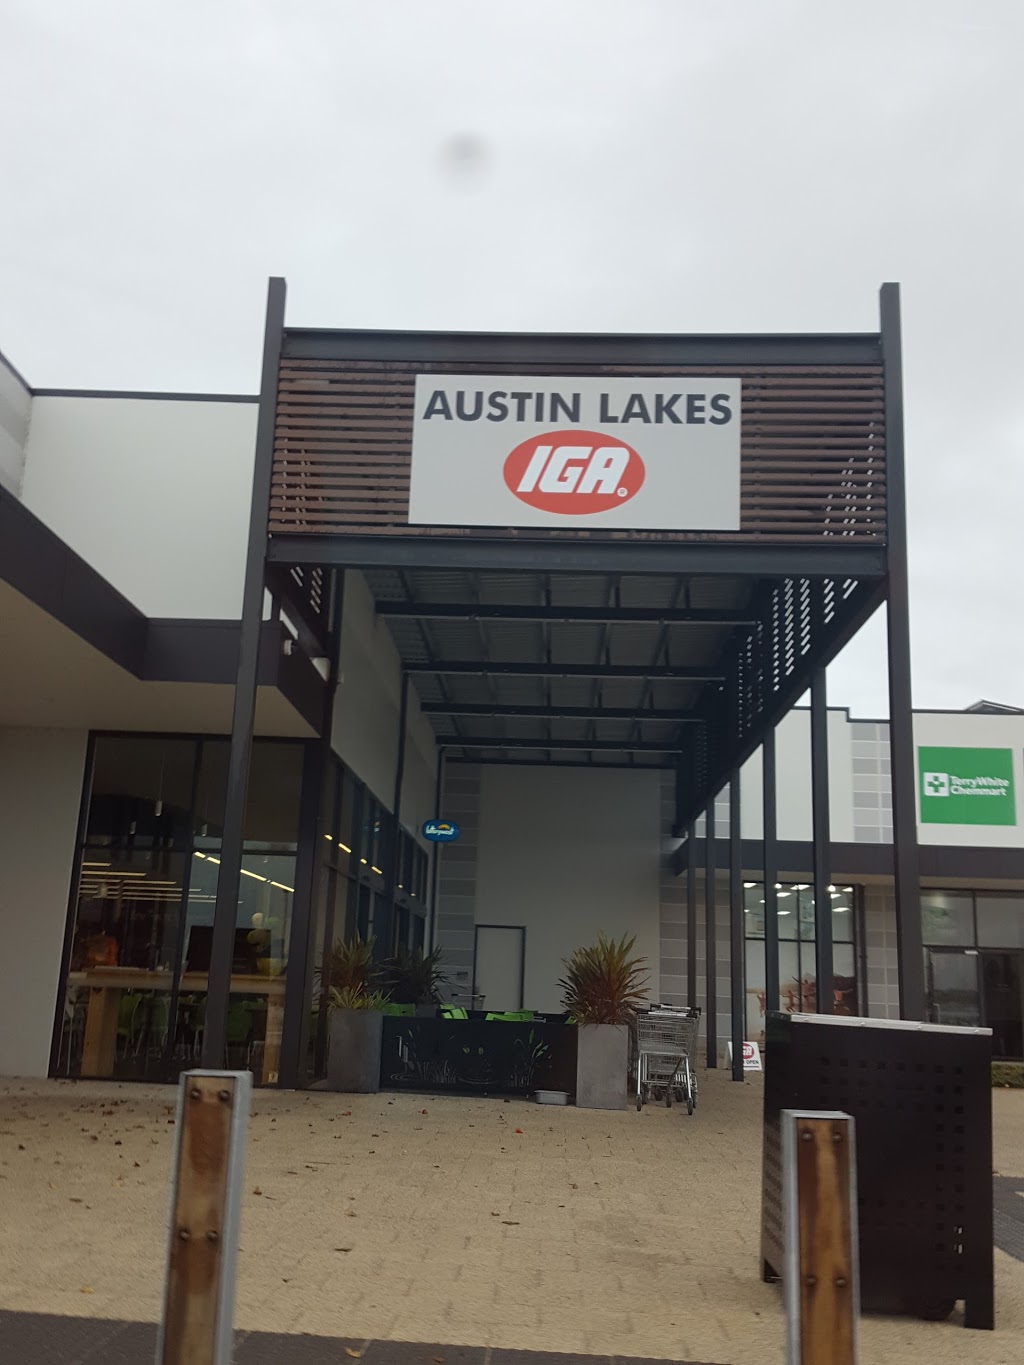 Austin Lakes IGA South Yunderup | store | 159 Inlet Blvd, Cnr Schoales Bend, South Yunderup WA 6208, Australia | 0895377773 OR +61 8 9537 7773